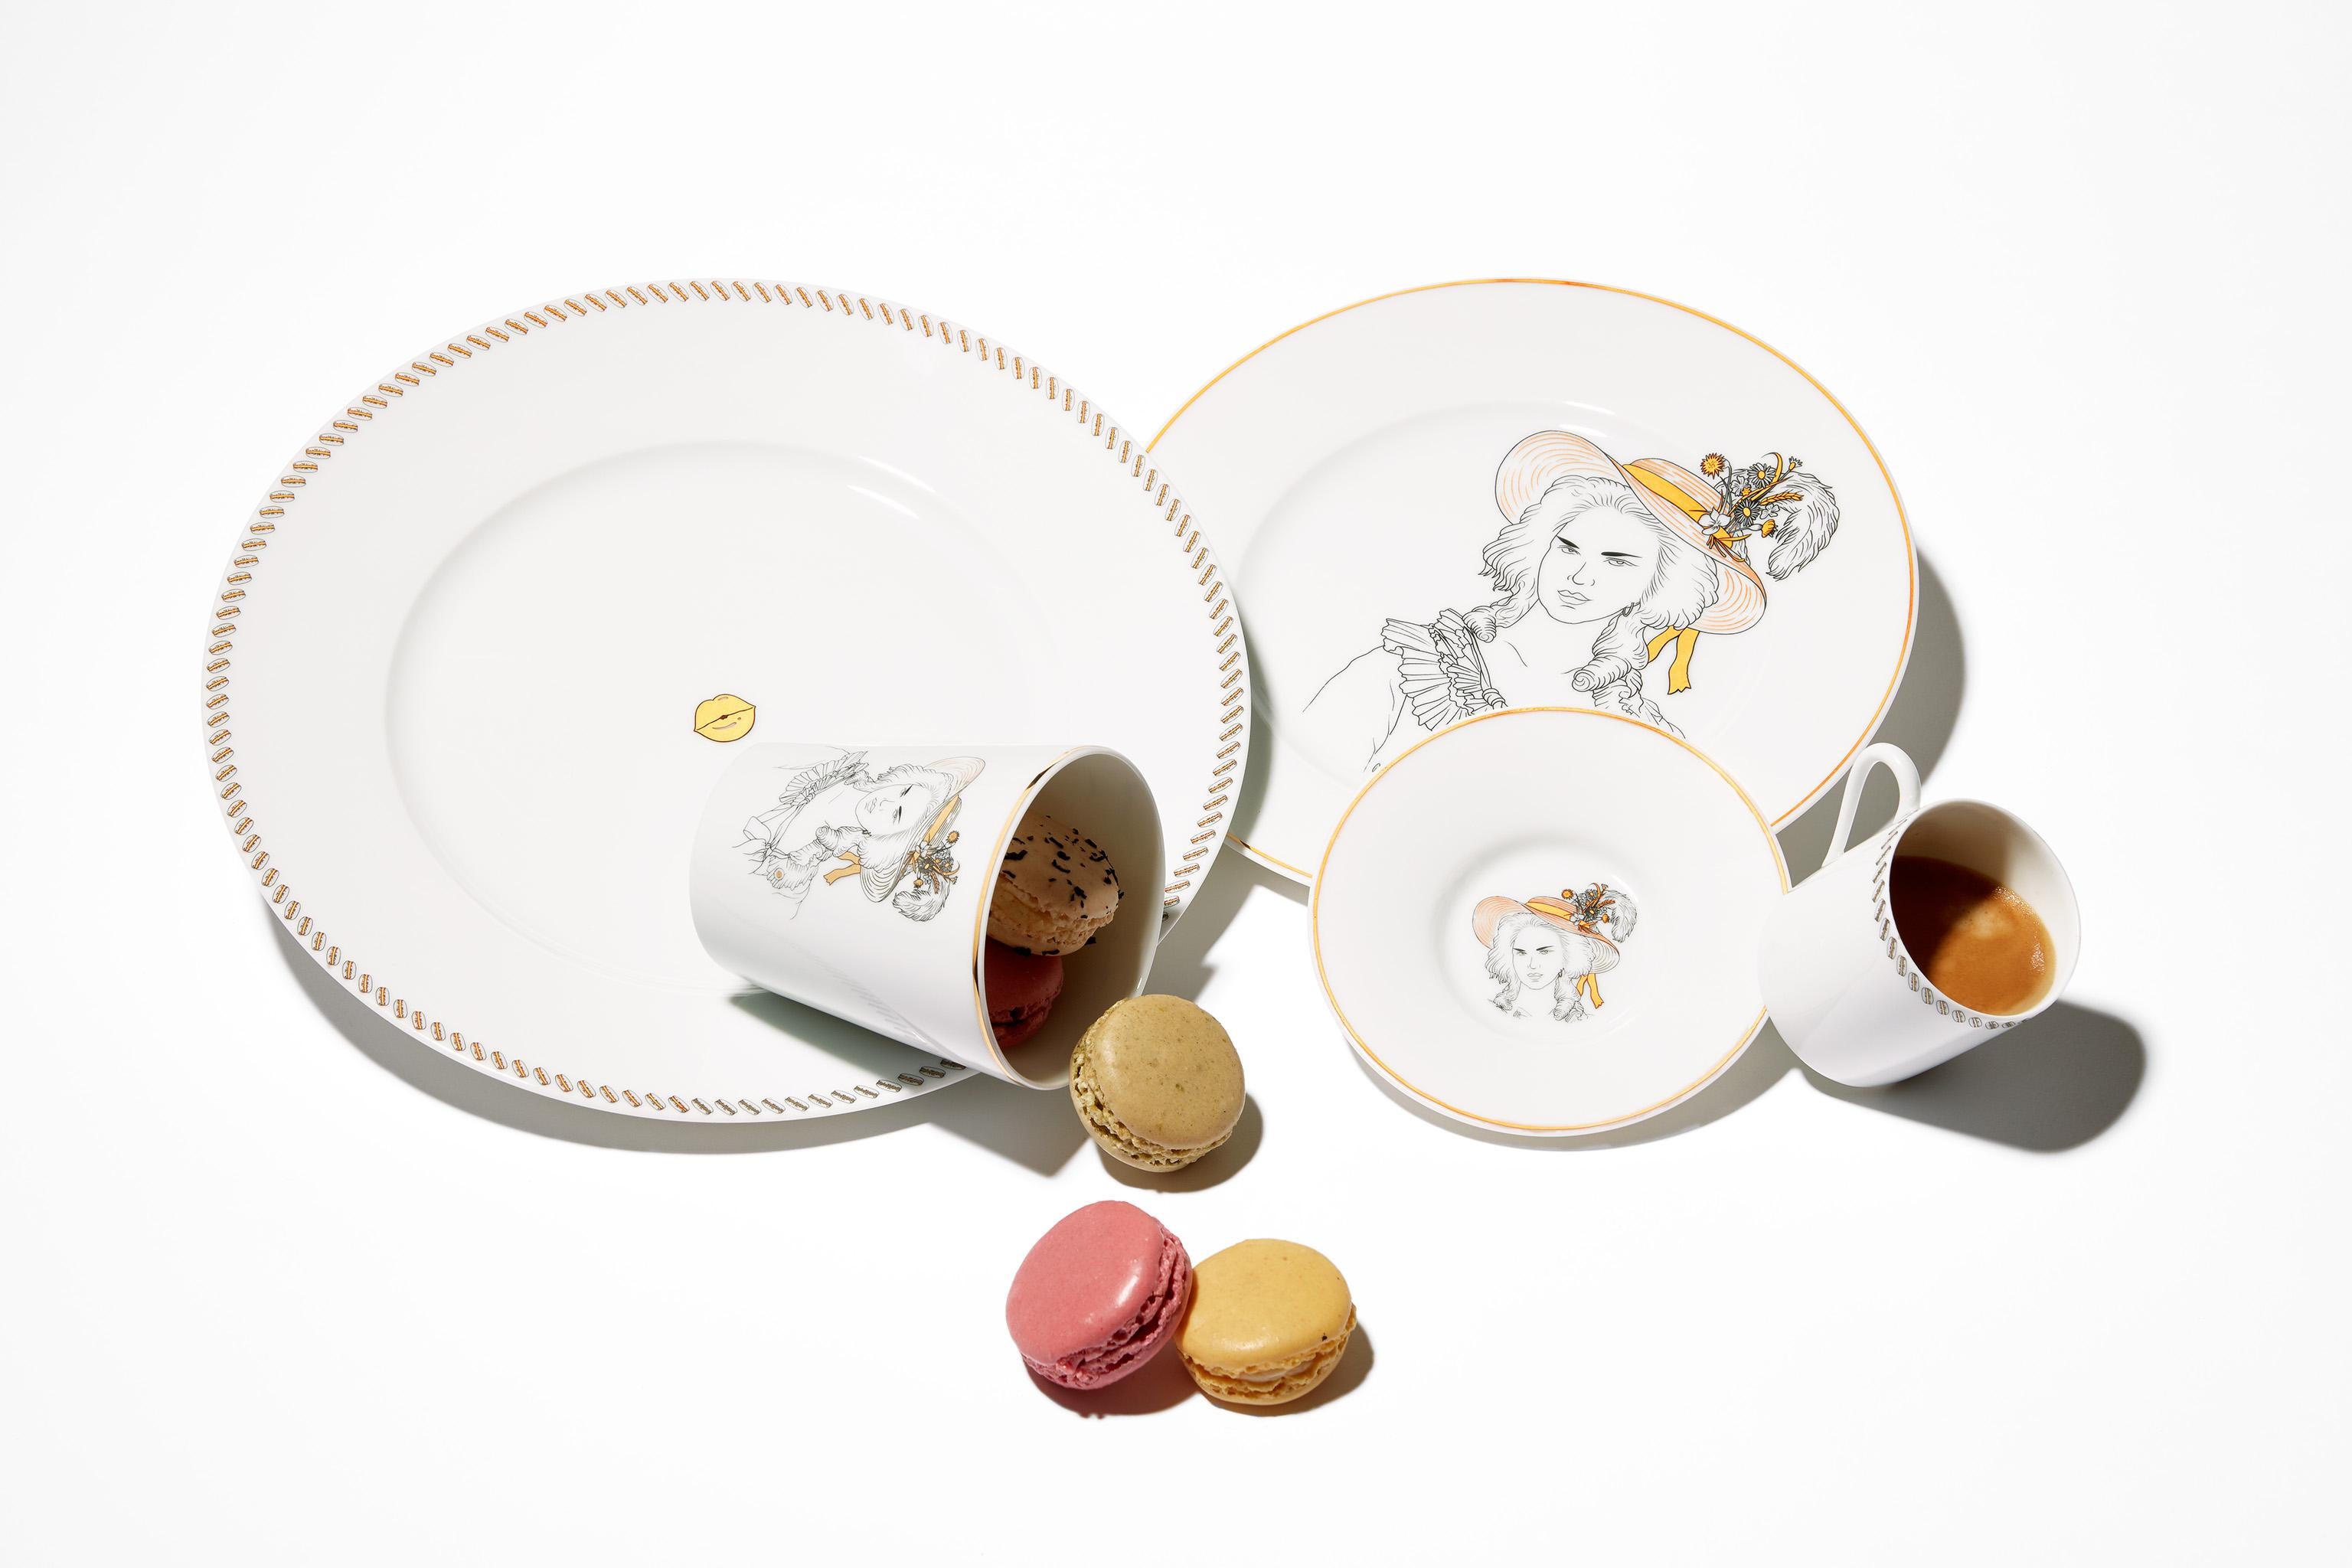 Maison Fragile and the Parisian Jean-Michel Tixier artist illustrator have joined together to create a collection tribute to these men and women, key figures of history, who have made Paris is Paris.

Porcelaine of Limoges extra fine.
Serigraphy